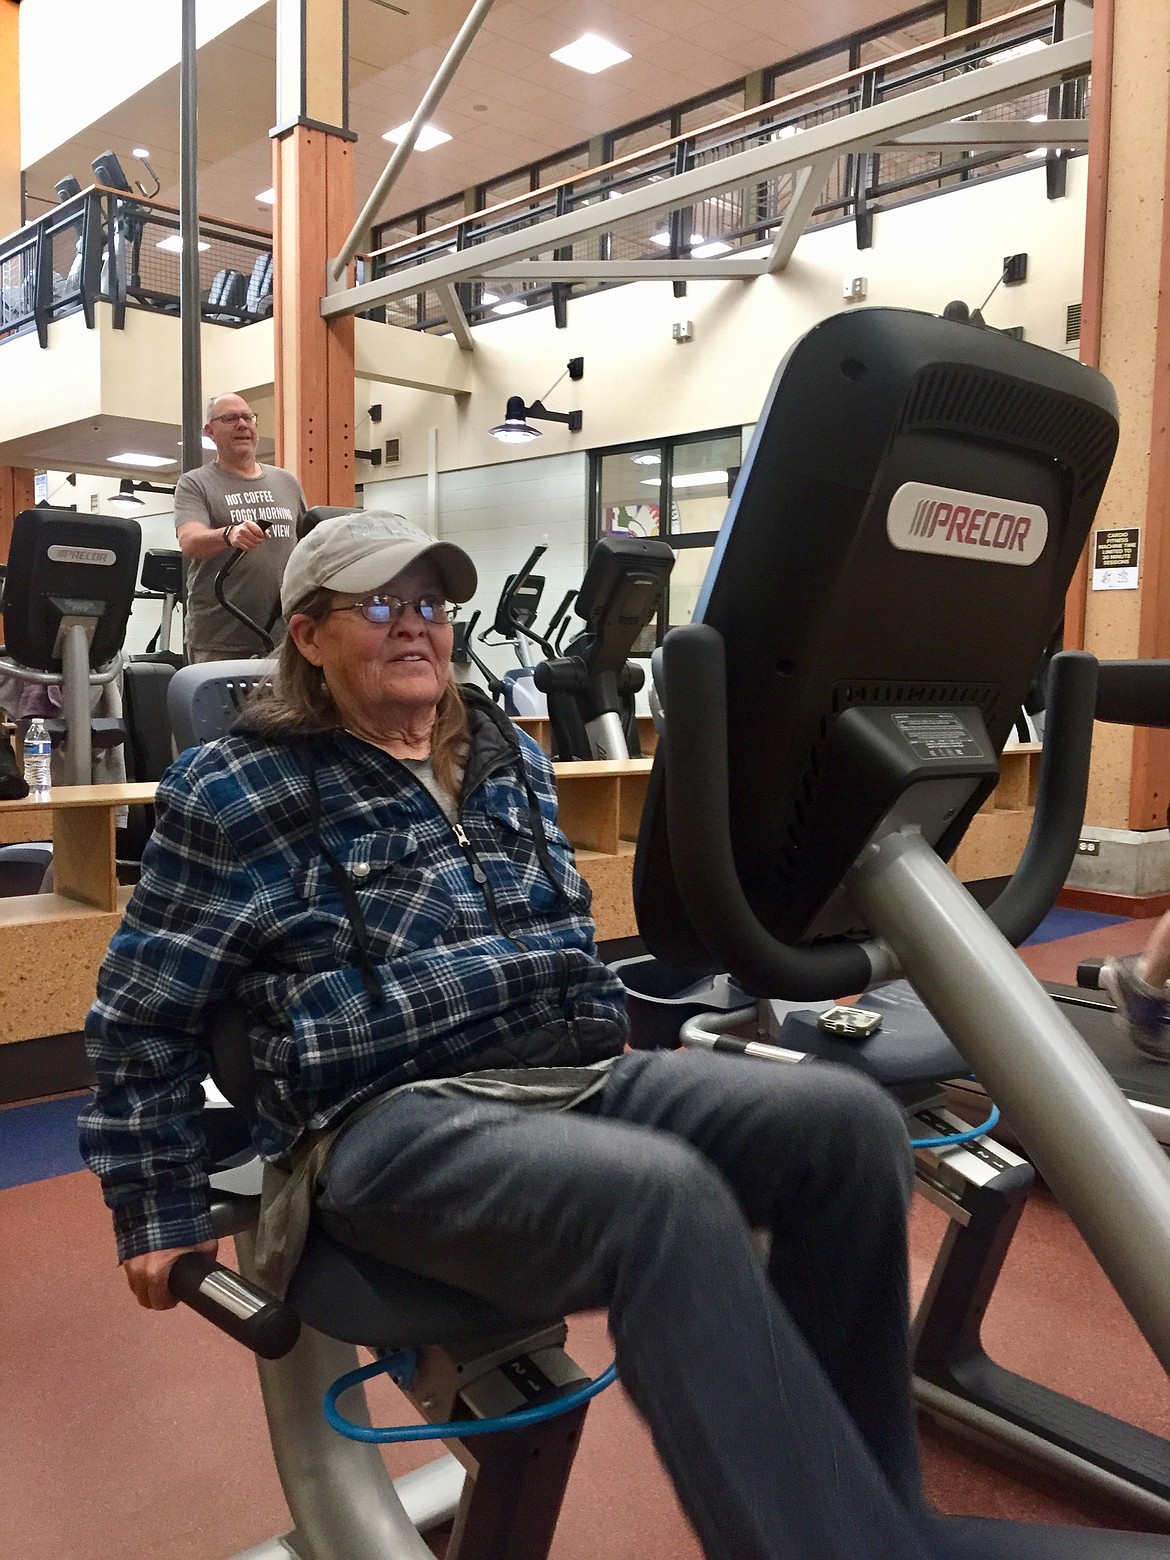 Sandy Howe peddles a stationary bicycle at the Kroc on Saterday. As a Kroc Center regular, she was so happy to be back in her routine. (JENNIFER PASSARO/Press)